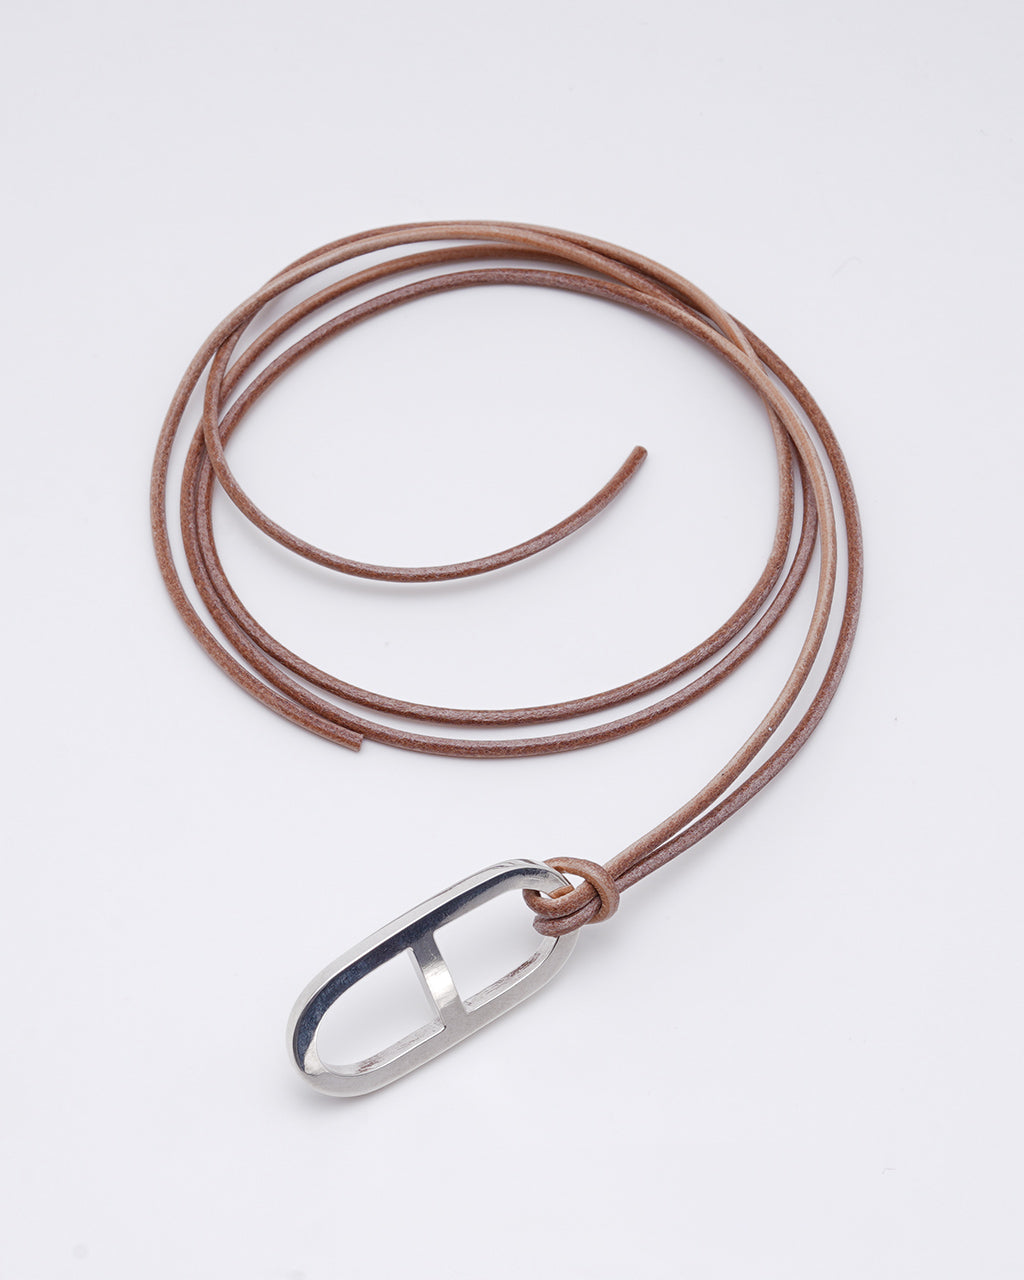 Garden of Eden ガーデンオブエデン アンカー レザー ネックレス ANCHER LEATHER NECKLACE(SMALL) シルバー925 アクセサリー 22AW005【送料無料】【クーポン対象外】